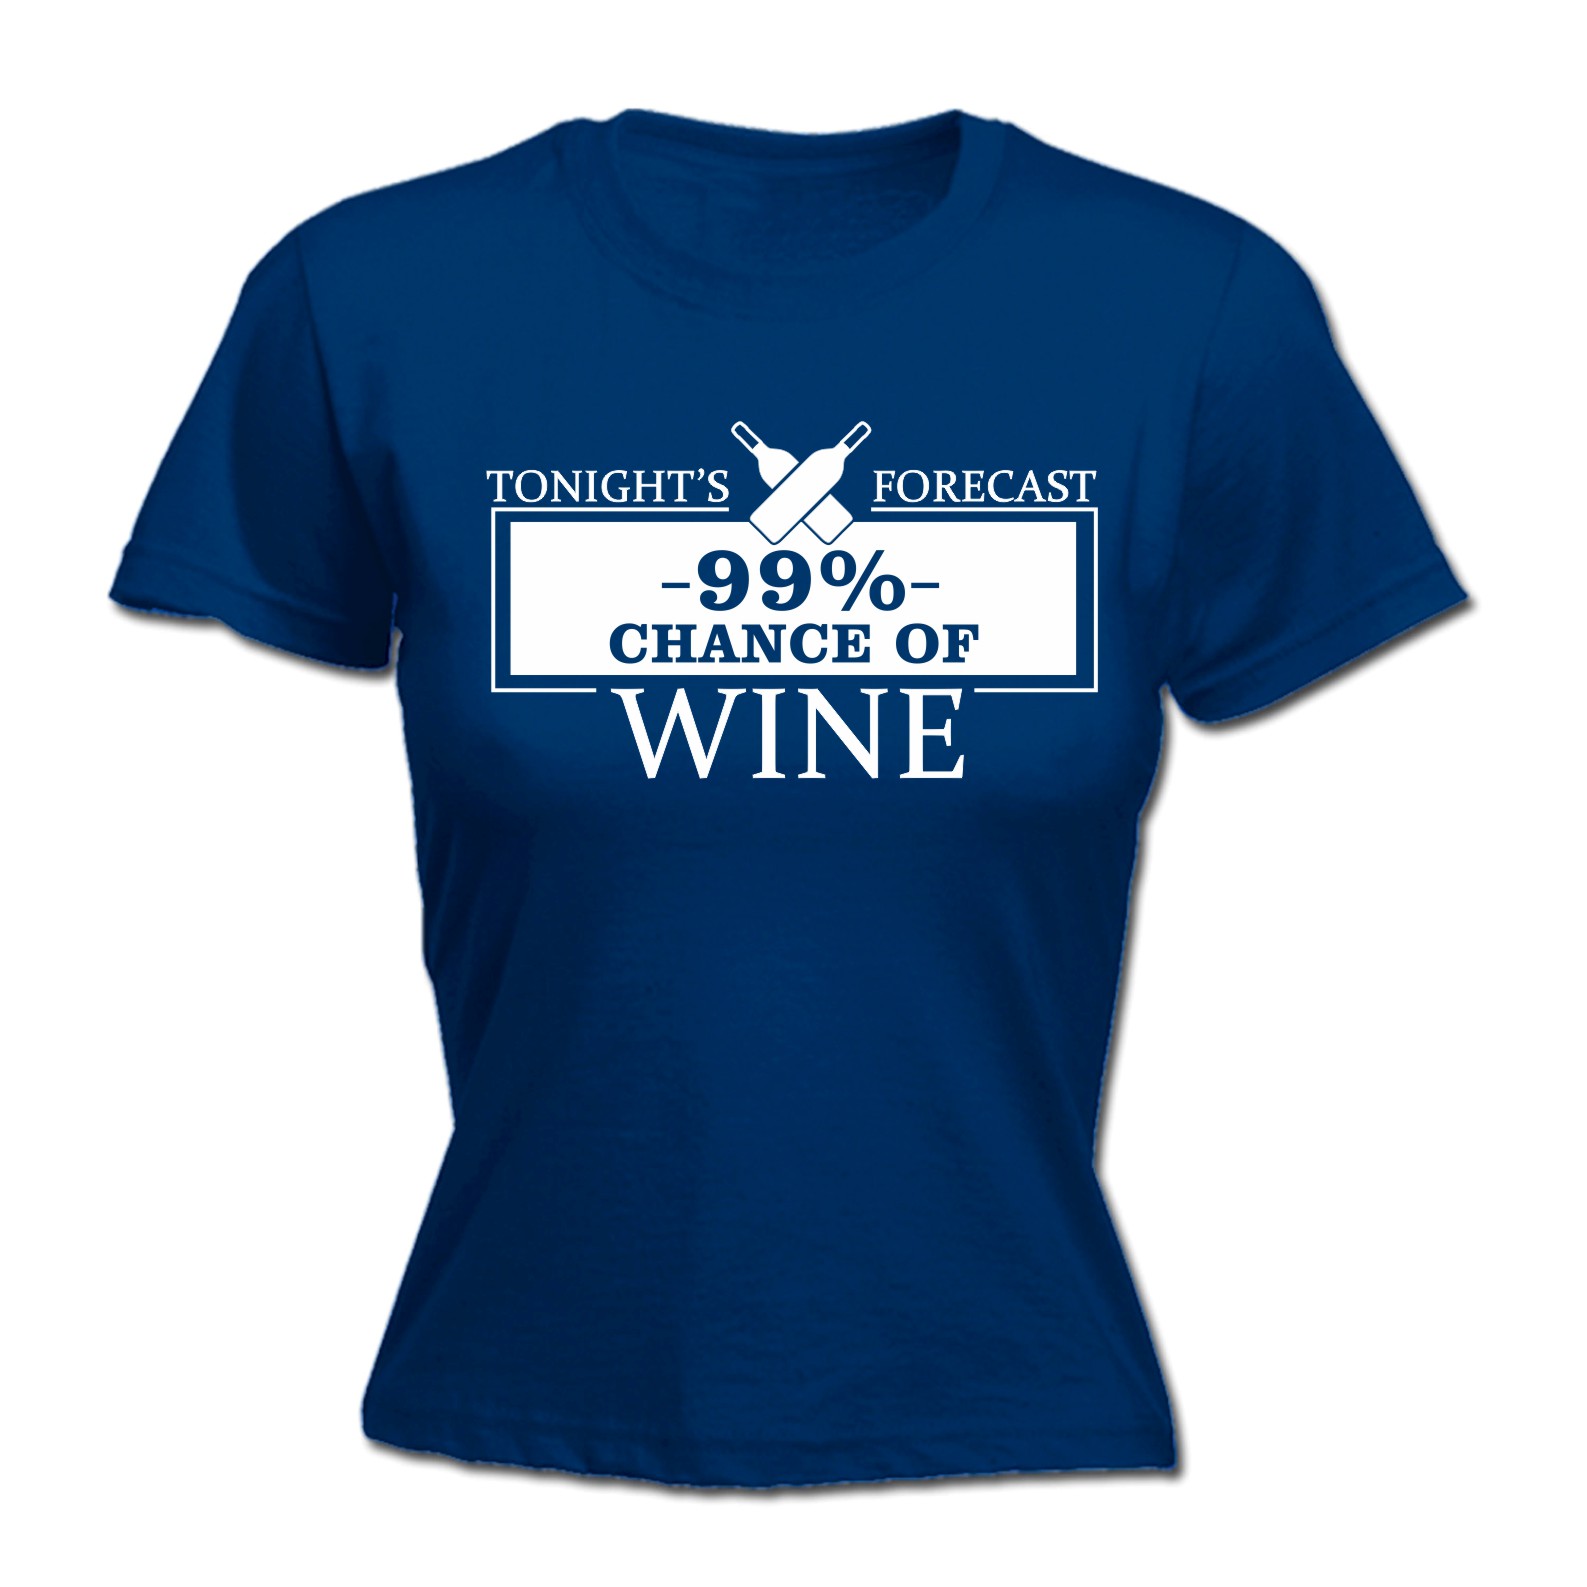 thumbnail 4 - Tonight Forecast 99% Chance Of Wine Funny Joke Adult Humour FITTED T-SHIRT Cool